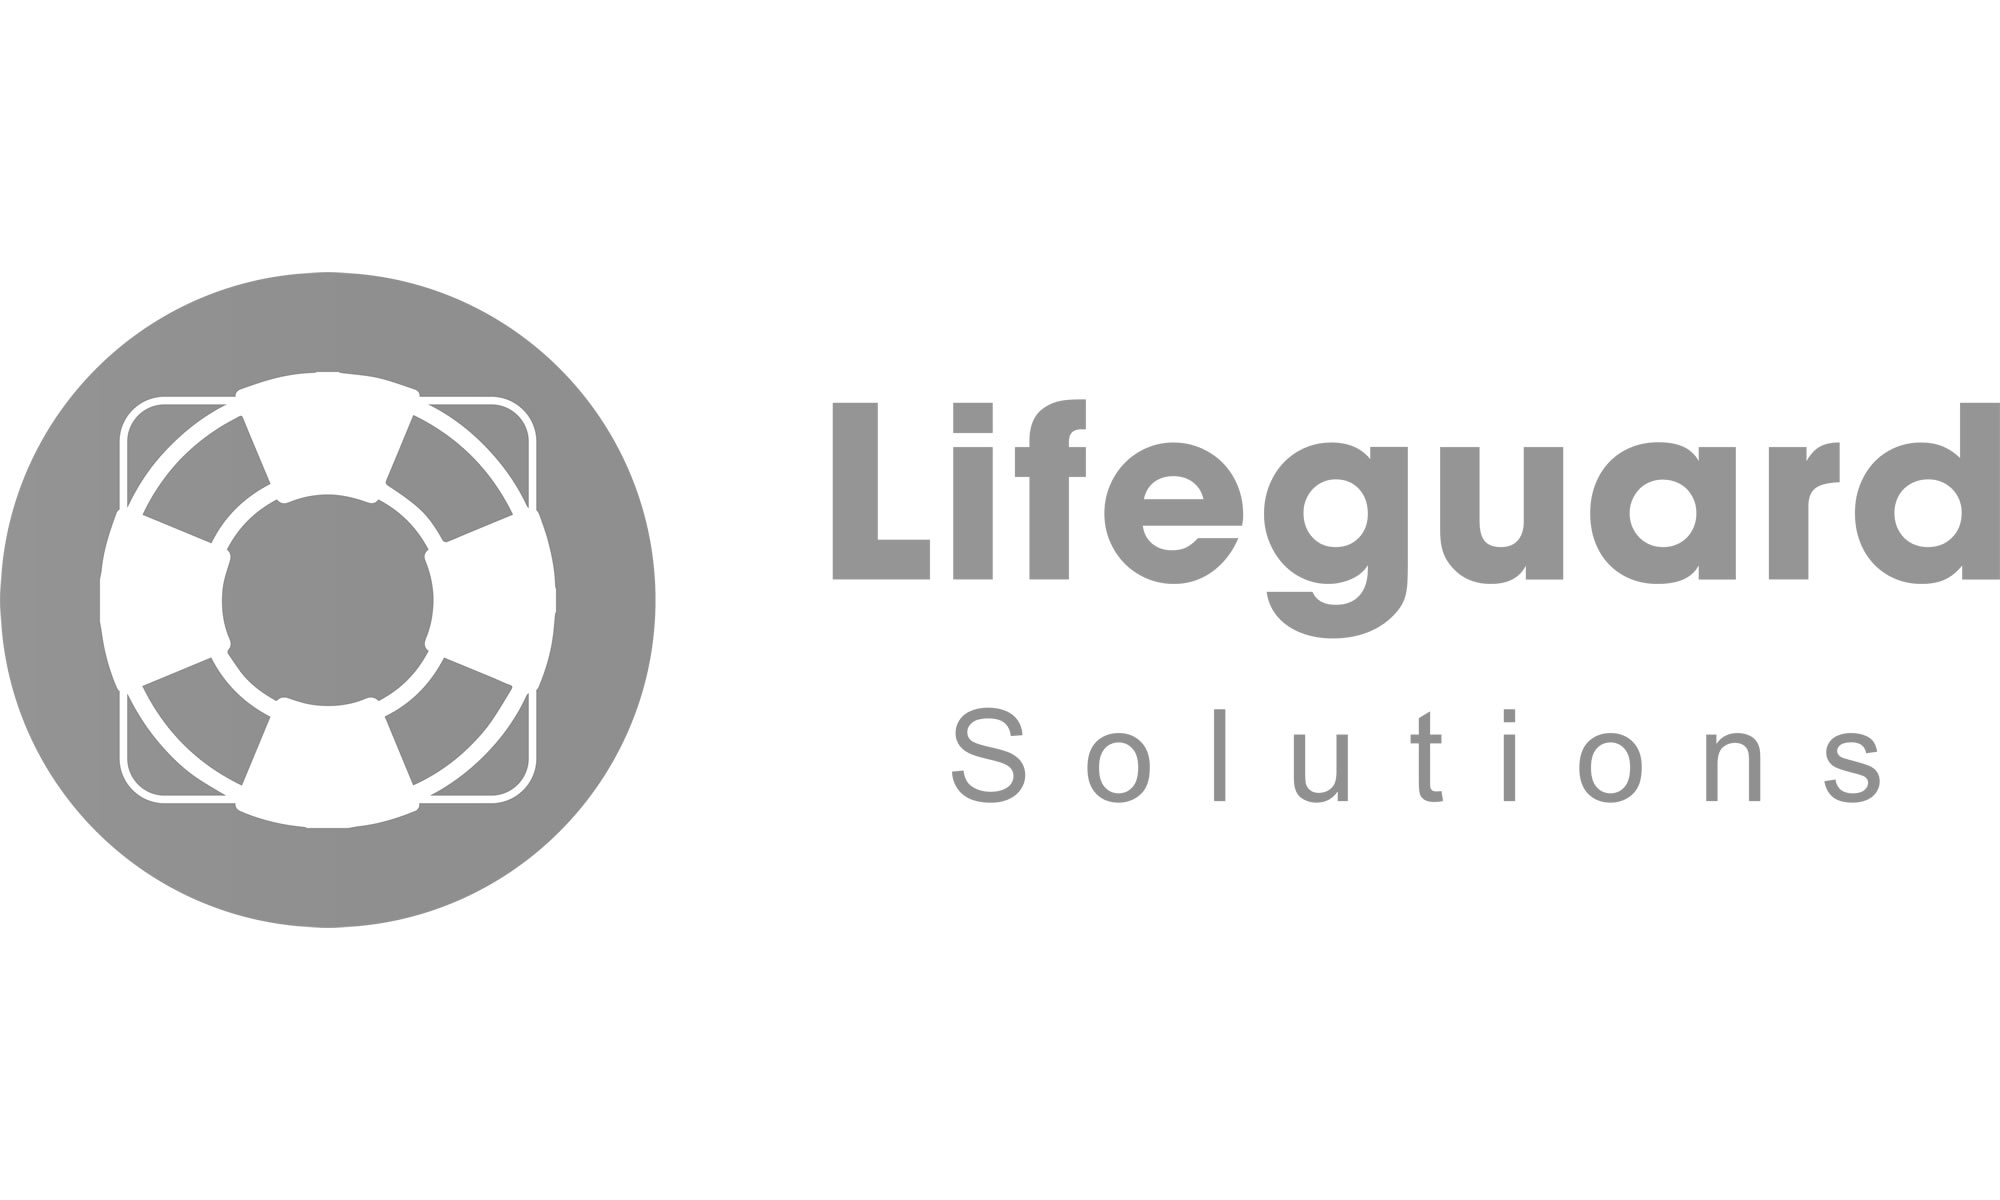 Lifeguard Solutions is the #1 App on the Salesforce AppExchange for Quality, Health, Safety and Environmental Management